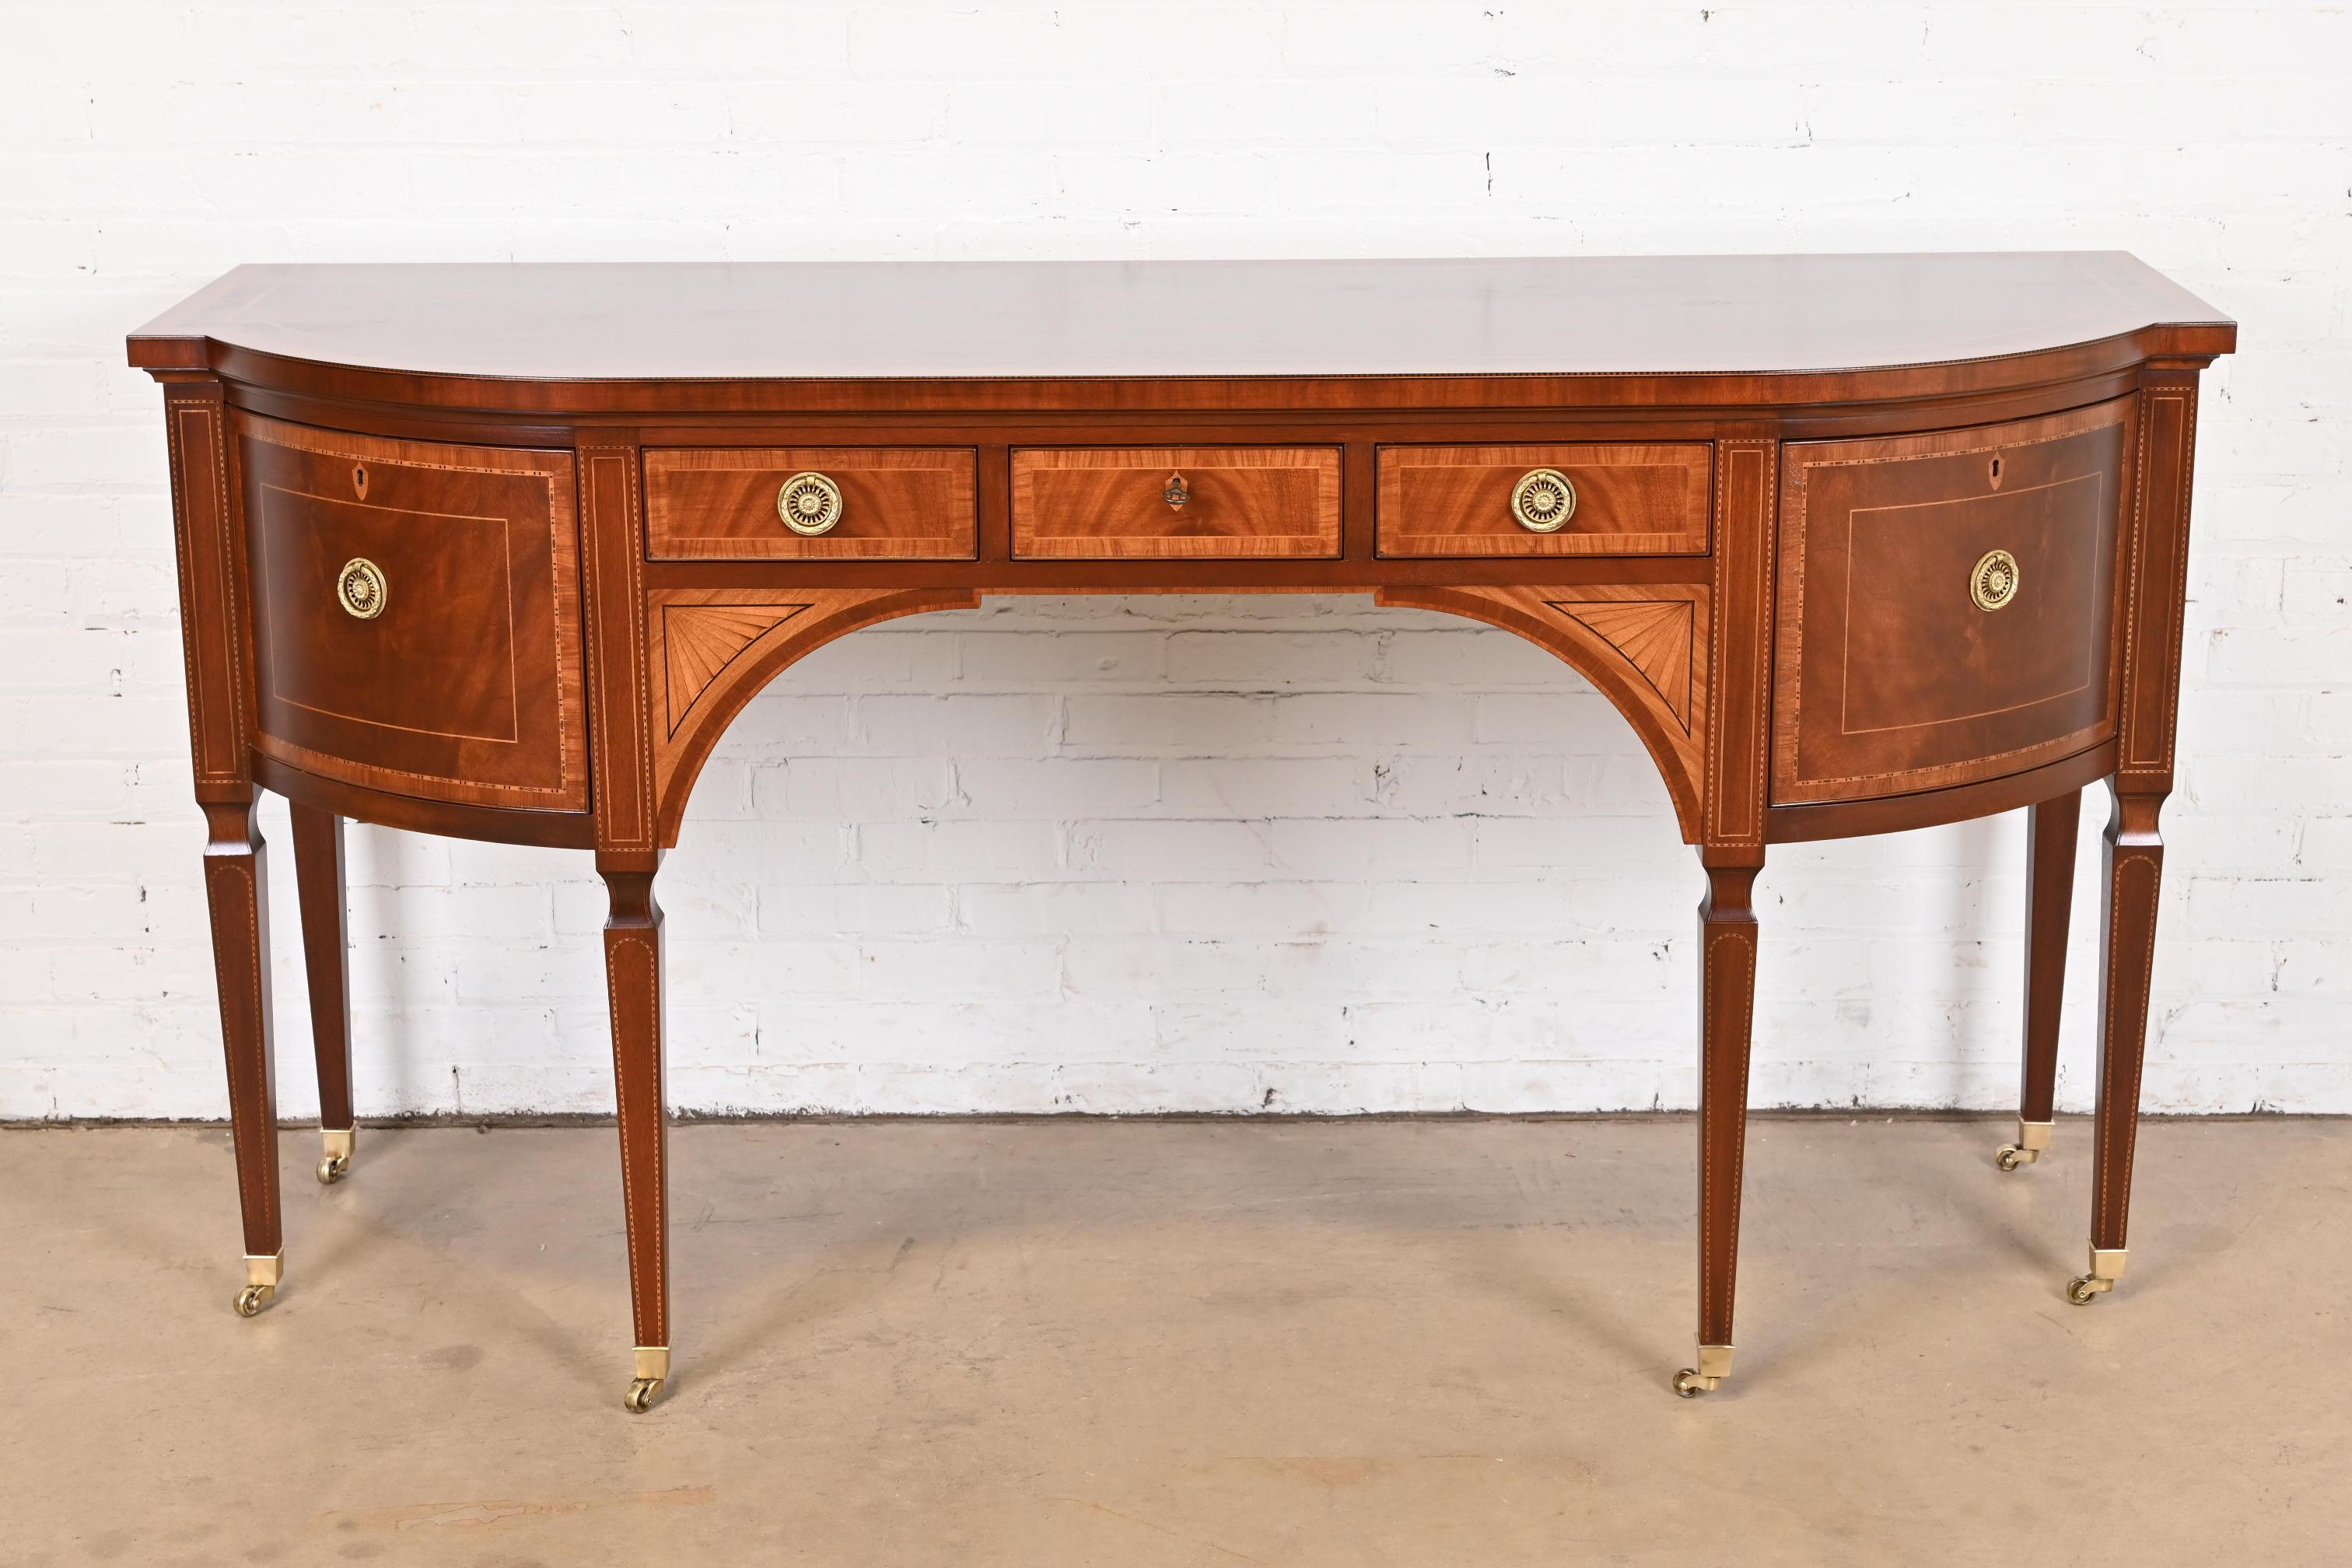 American Baker Furniture Stately Homes Sheraton Inlaid Mahogany Sideboard, Refinished